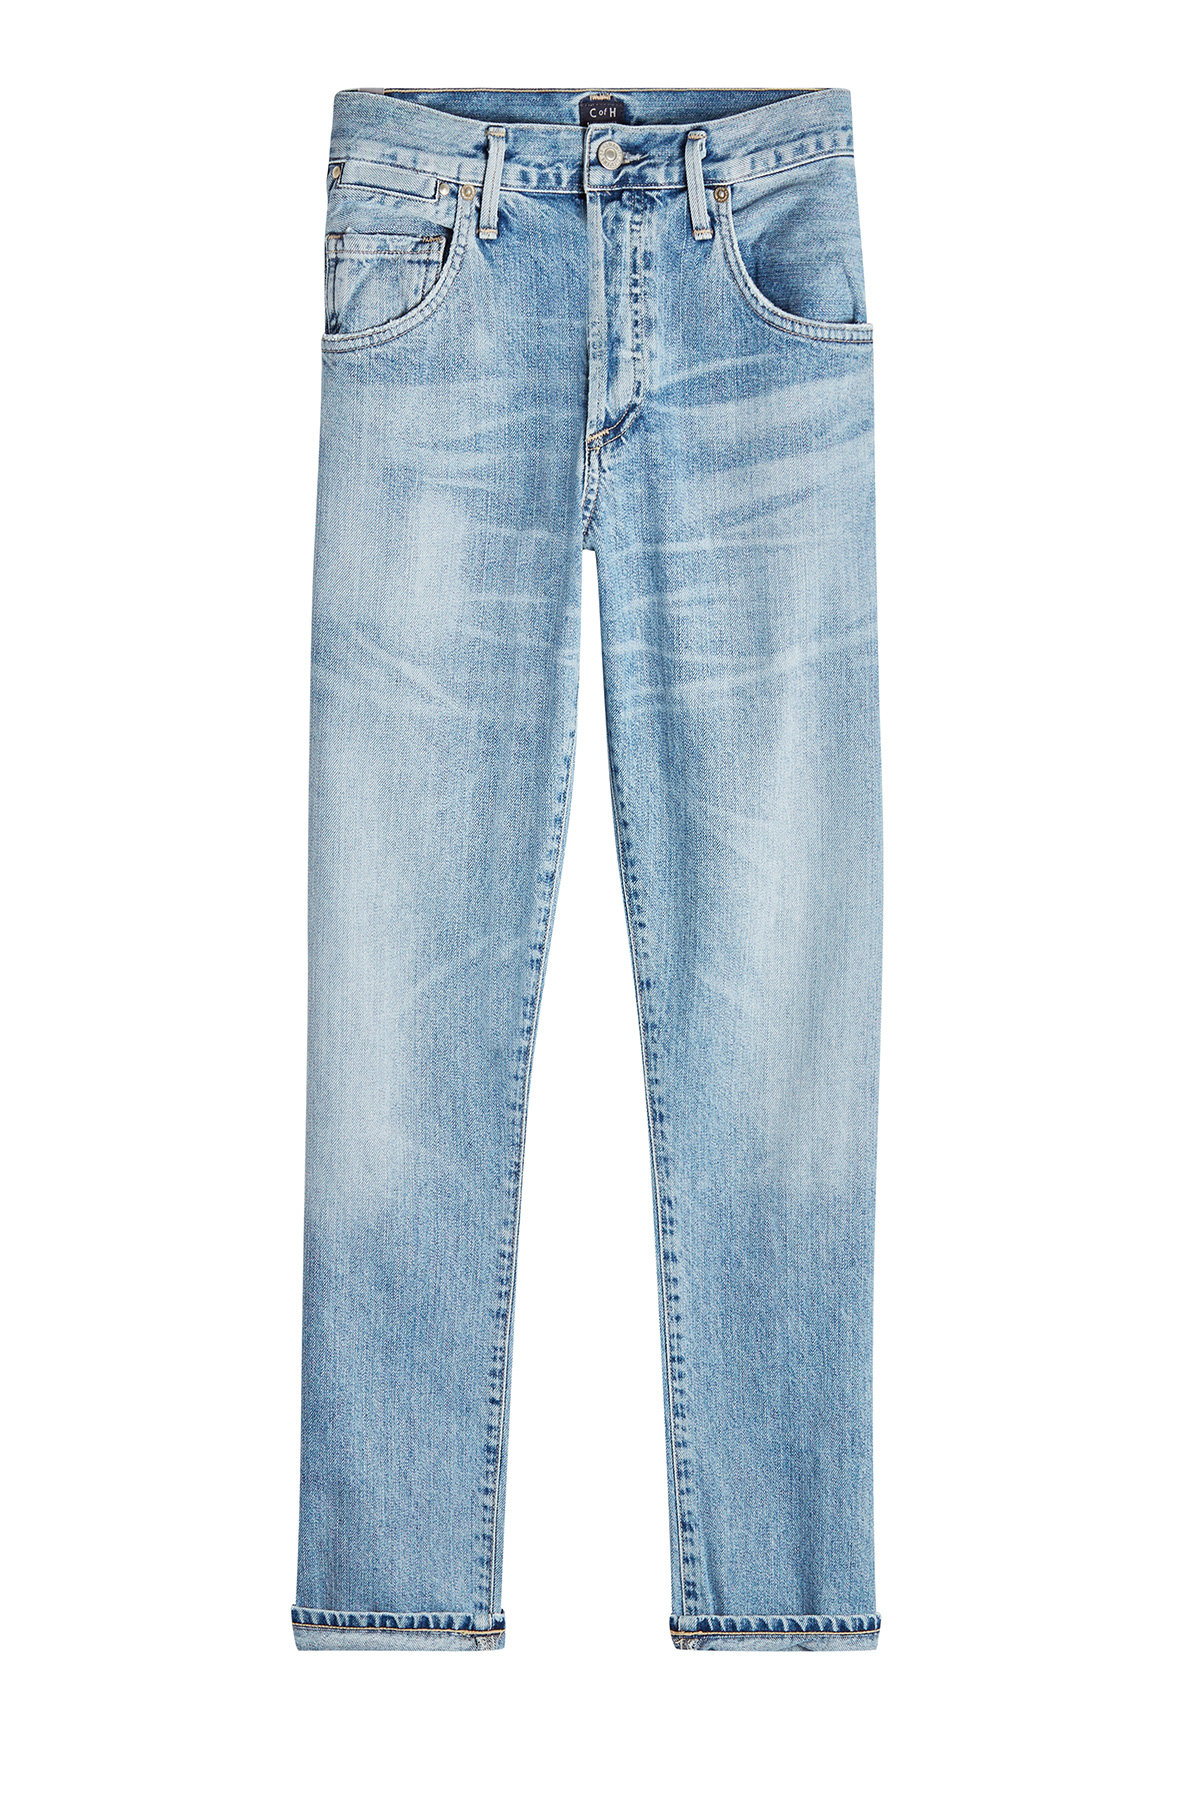 Citizens of Humanity - Sunday Morning Emerson Cropped Jeans